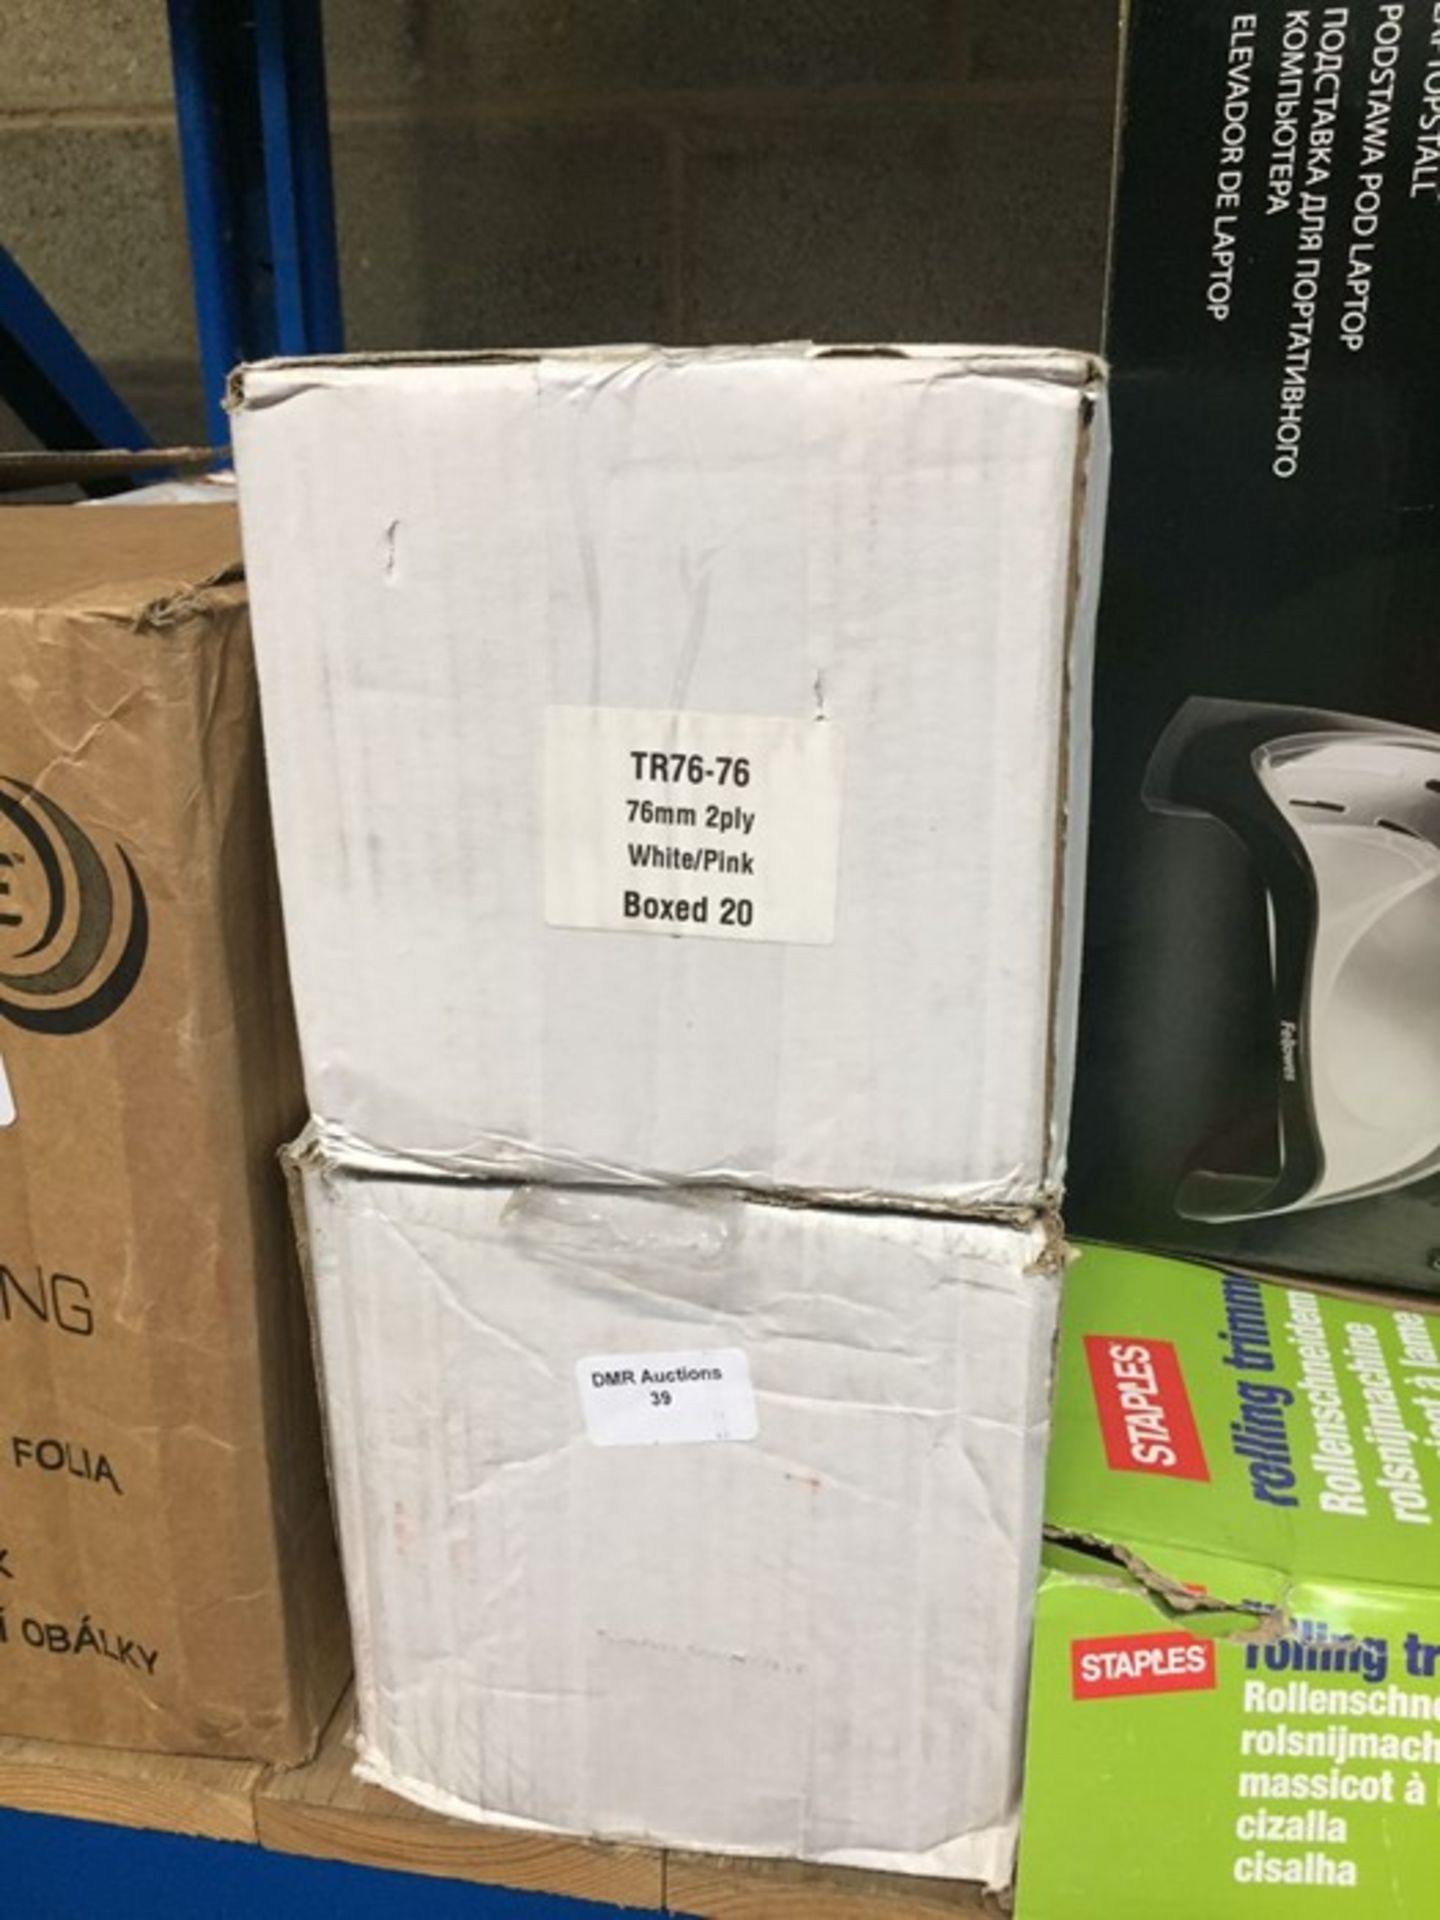 1 LOT TO CONTAIN 2 X BOXES OF 76MM TILL ROLLS - L3